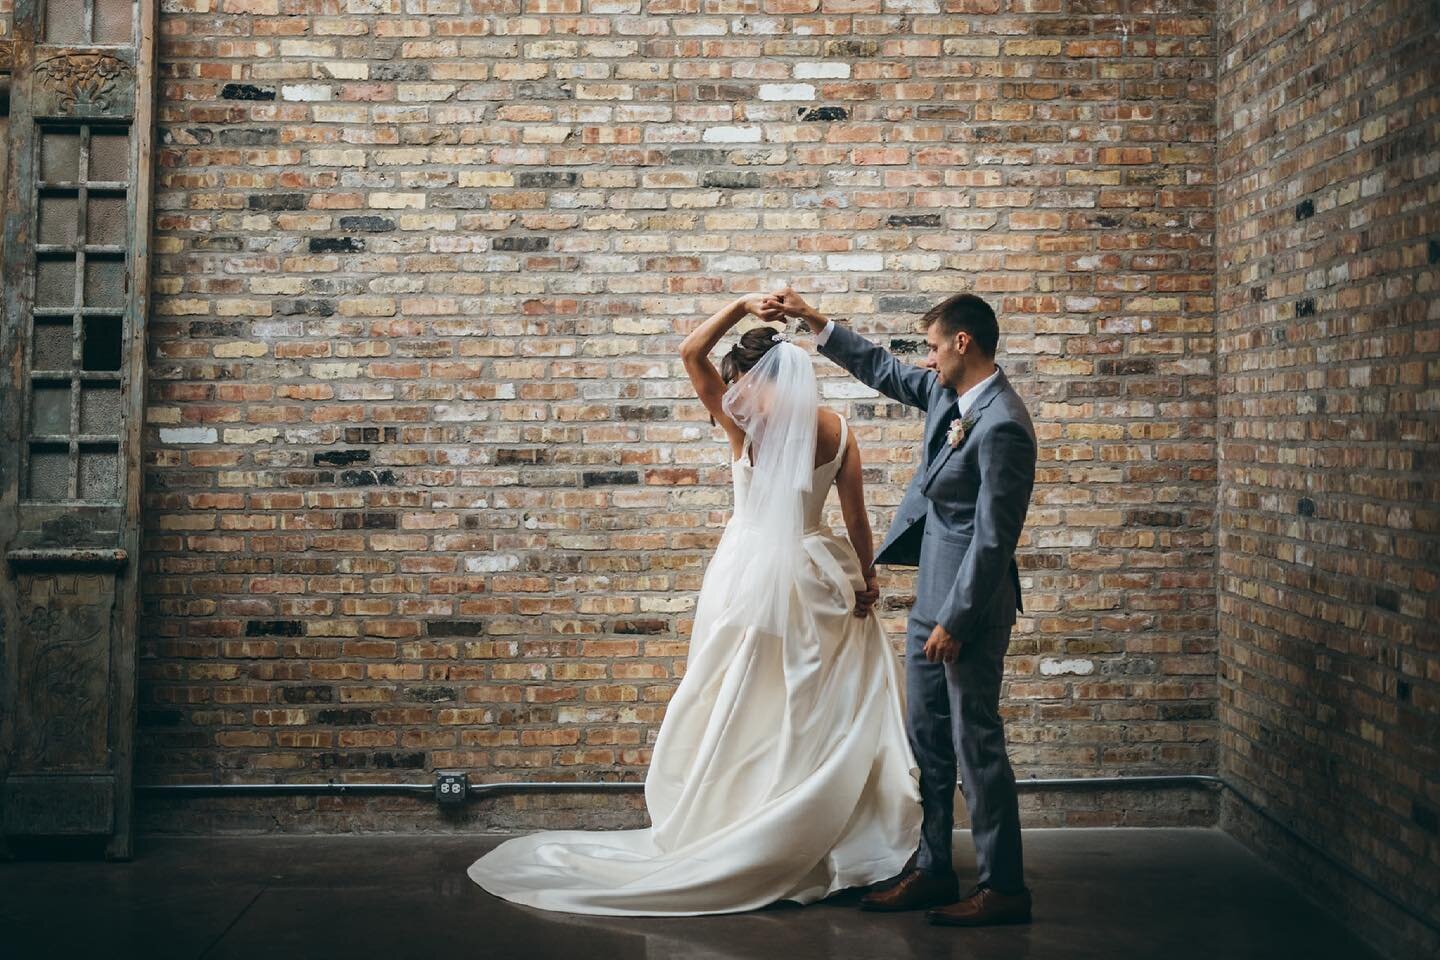 Create timeless moments 💕

Specializing in intimate, wedding ceremony celebrations, Neighborhood Nuptials is the top choice for an all inclusive wedding experience that&rsquo;s unique, memorable, and a meaningful alternative to the courthouse I DOs.